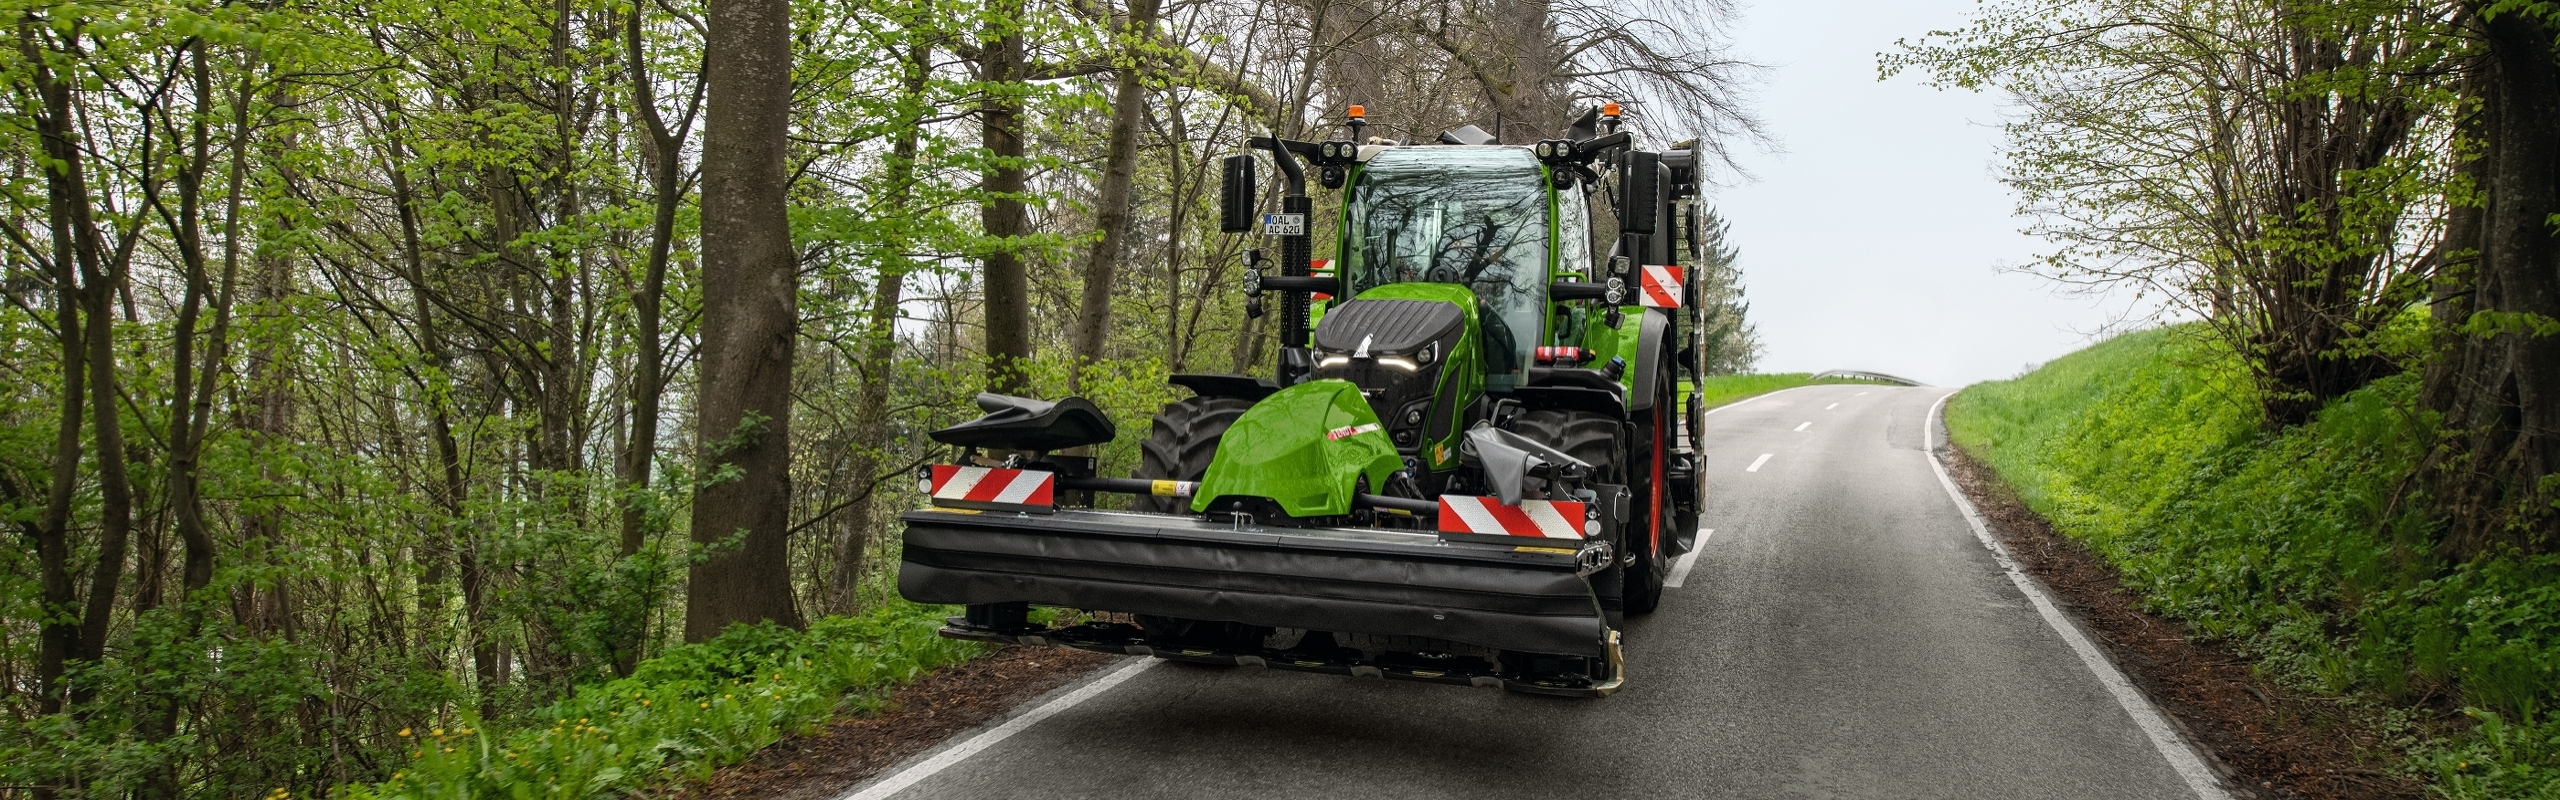 Fendt 600 Vario with mower driving on a road